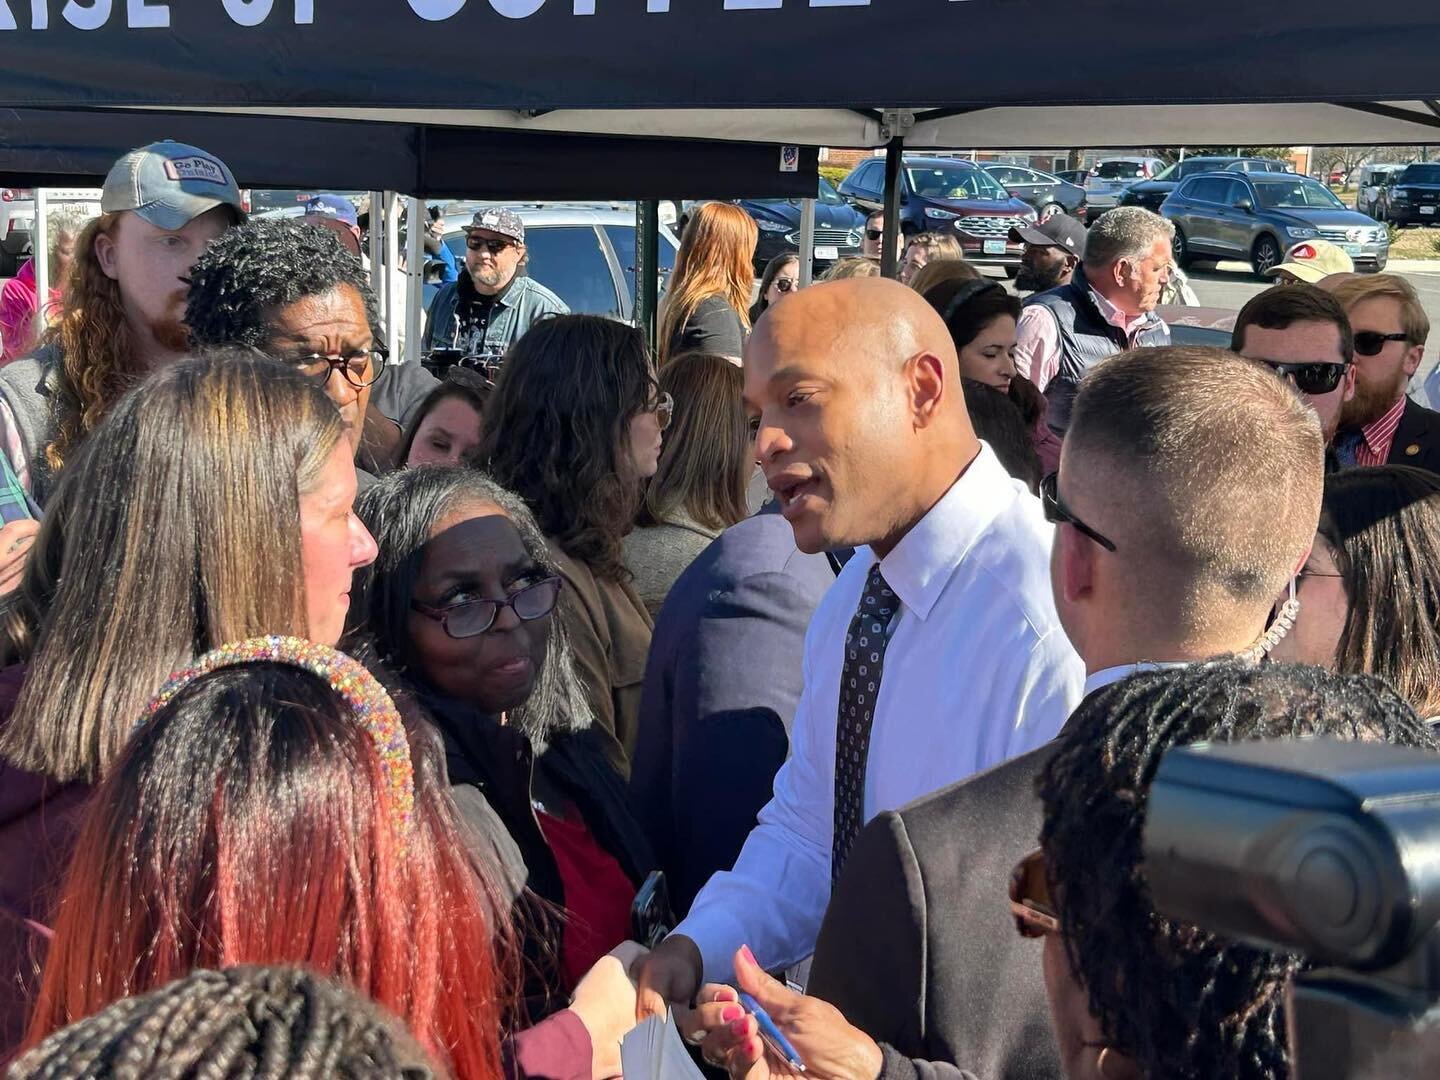 Leaders meeting leaders. A great pic of Emily Jackson, our county&rsquo;s fantastic School Board President, chatting with Governor @iamwesmoore after his inspiring speech in Easton yesterday!